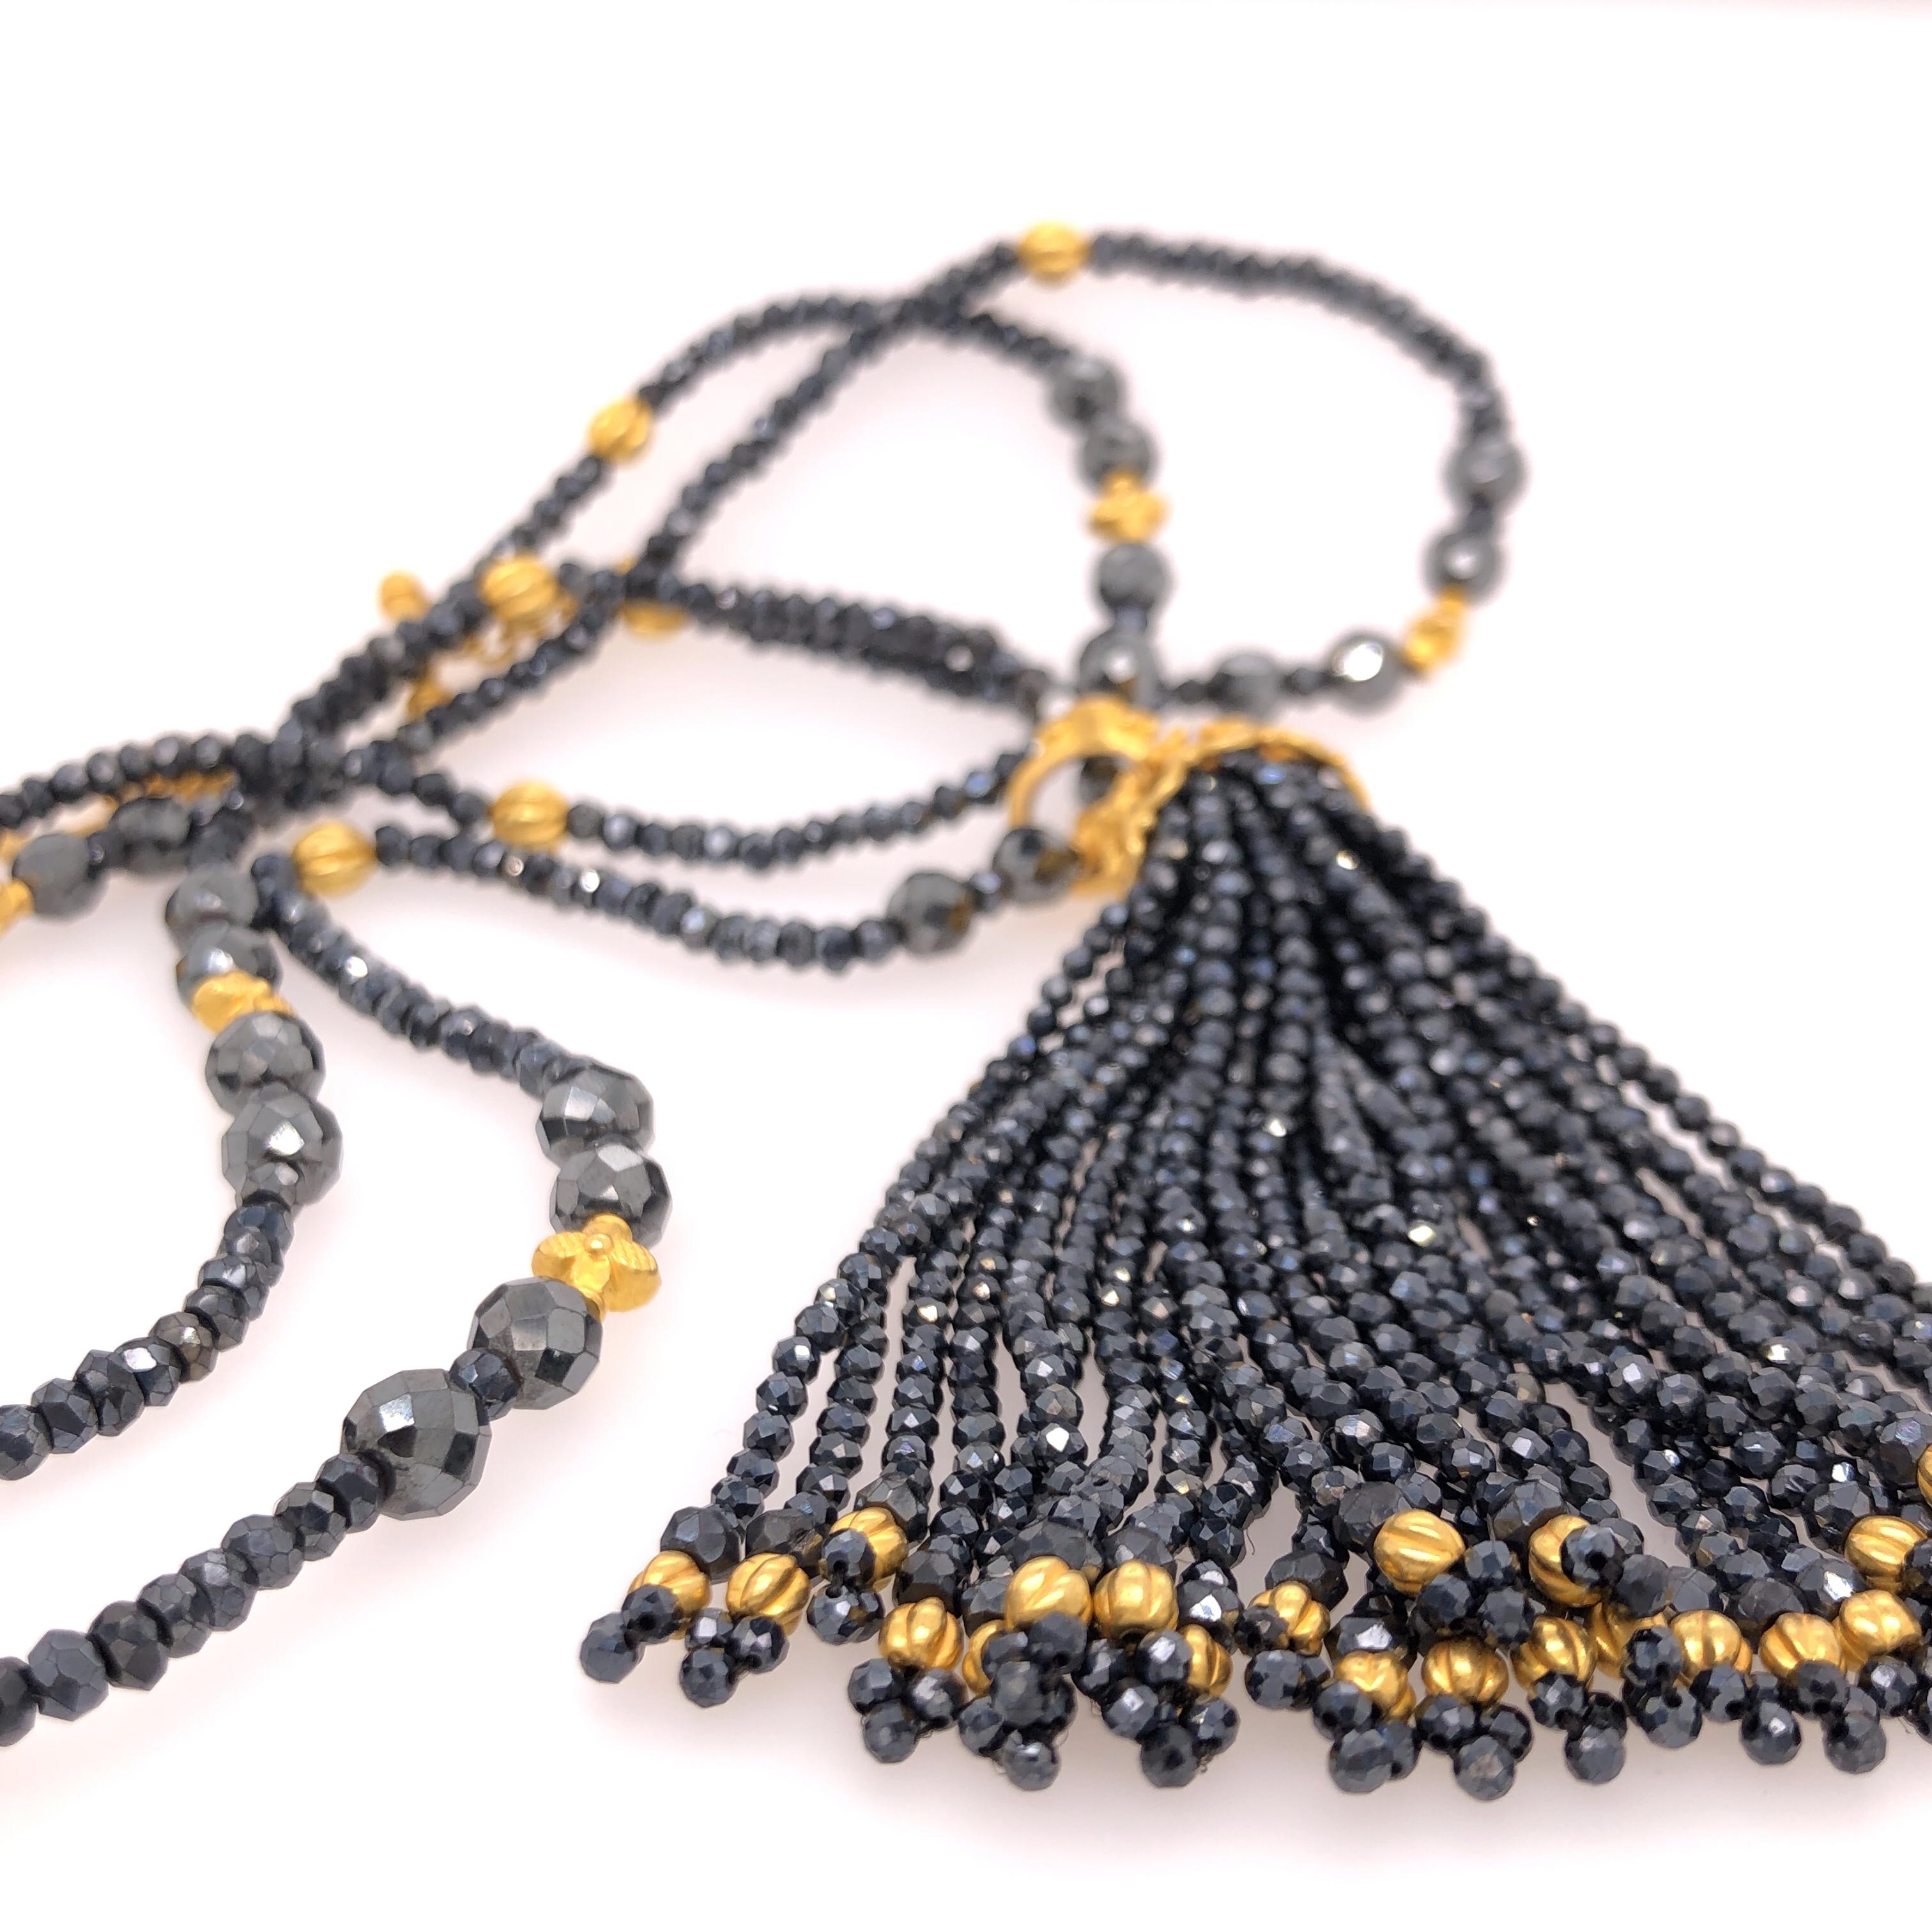 121.5 CTW Spinel Lola Necklace 
18K YG 
Loop Tassel consists of 89 carats of black spinel faceted beads with a 22k gold handmade cap and black diamond-set detachable clip.

Stamped: 18K, C. Tyler, Indonesia